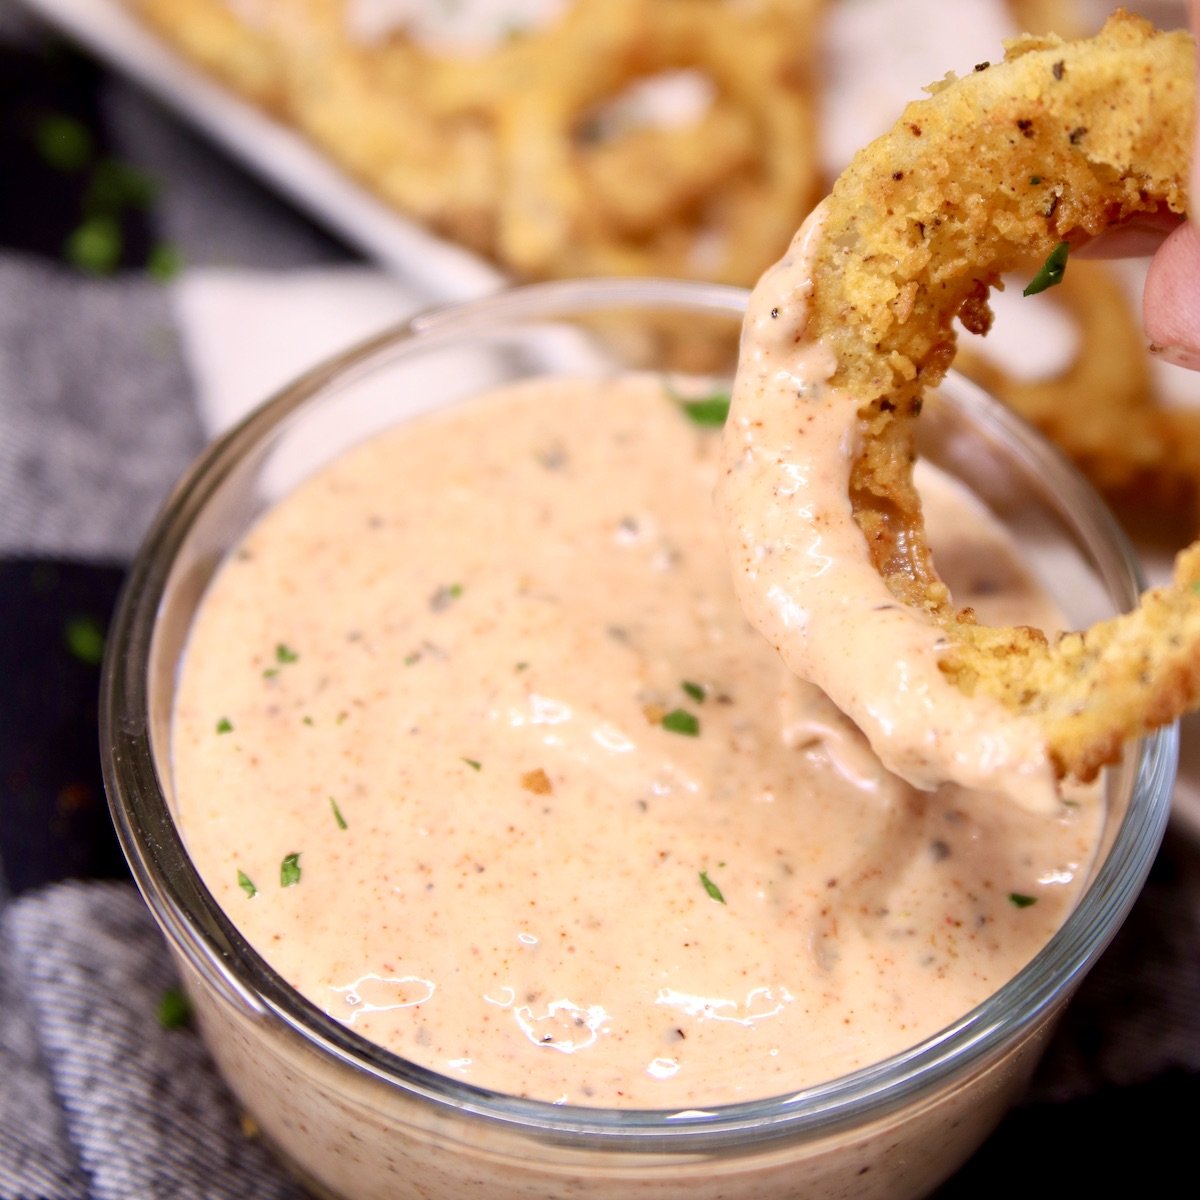 Blooming Onion Dipping Sauce Recipe image F